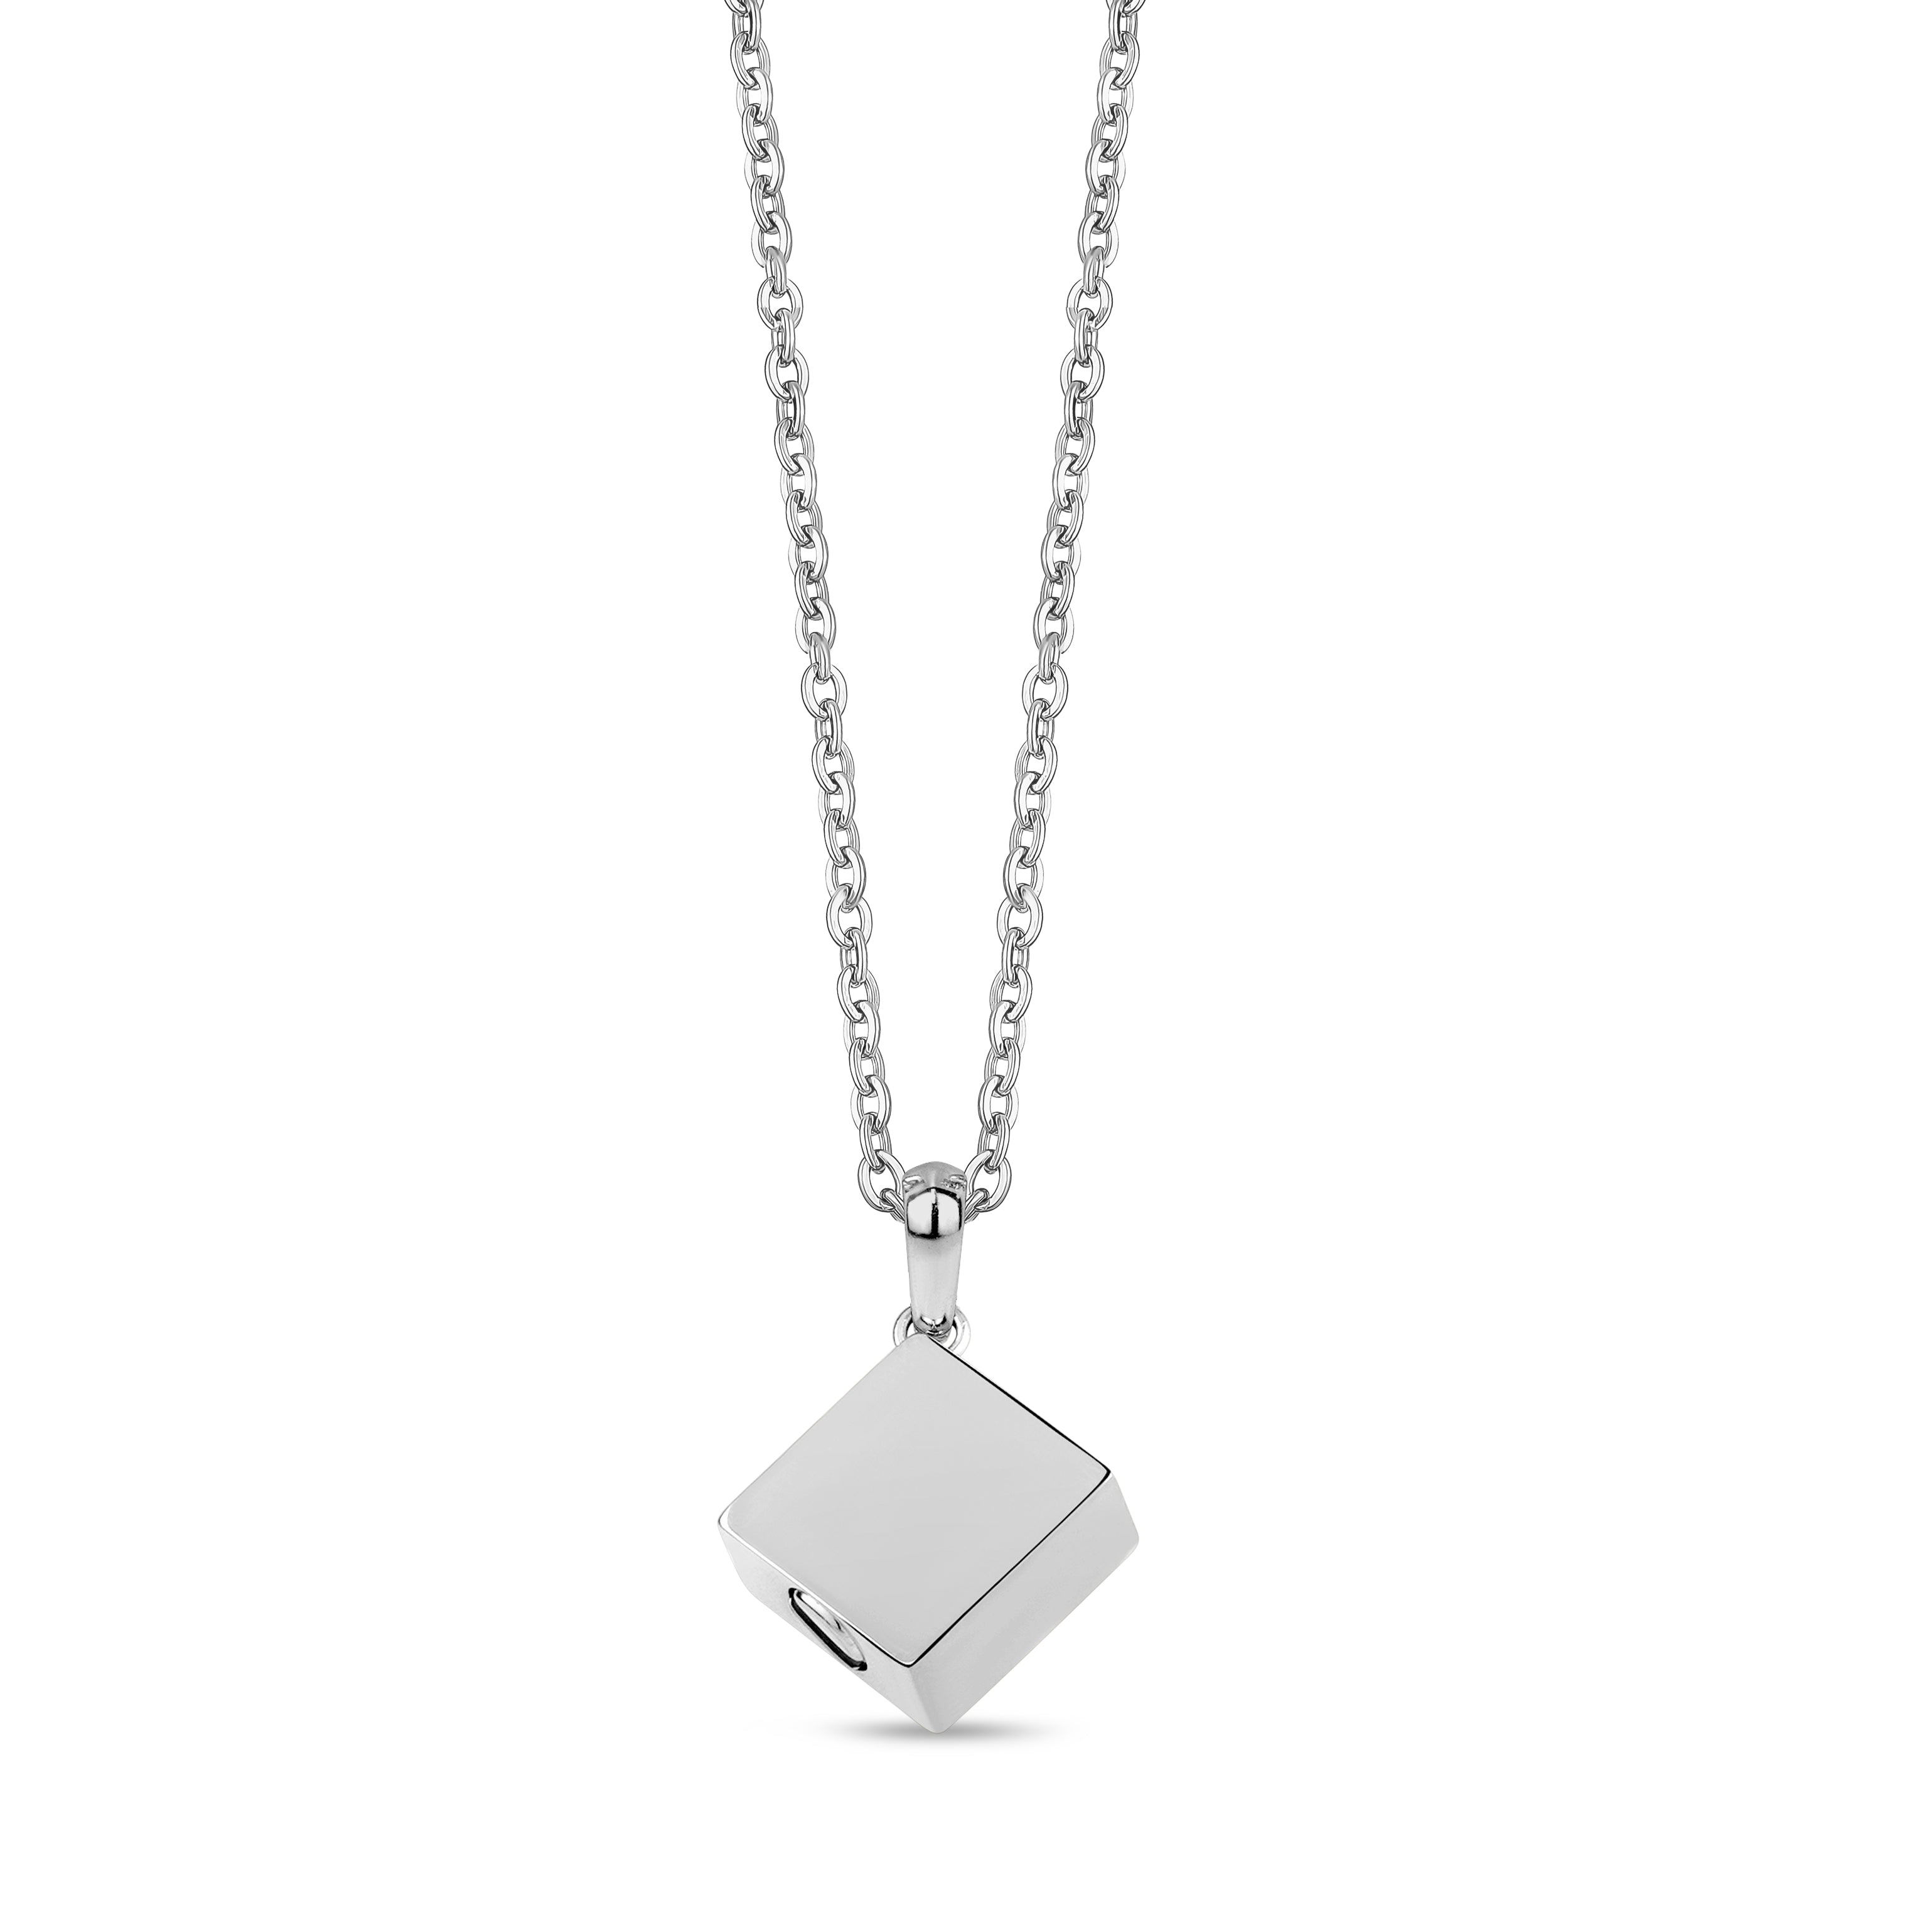 Personalized Diamond Square Cremation Urn Pendant for Ashes – The Steel Shop